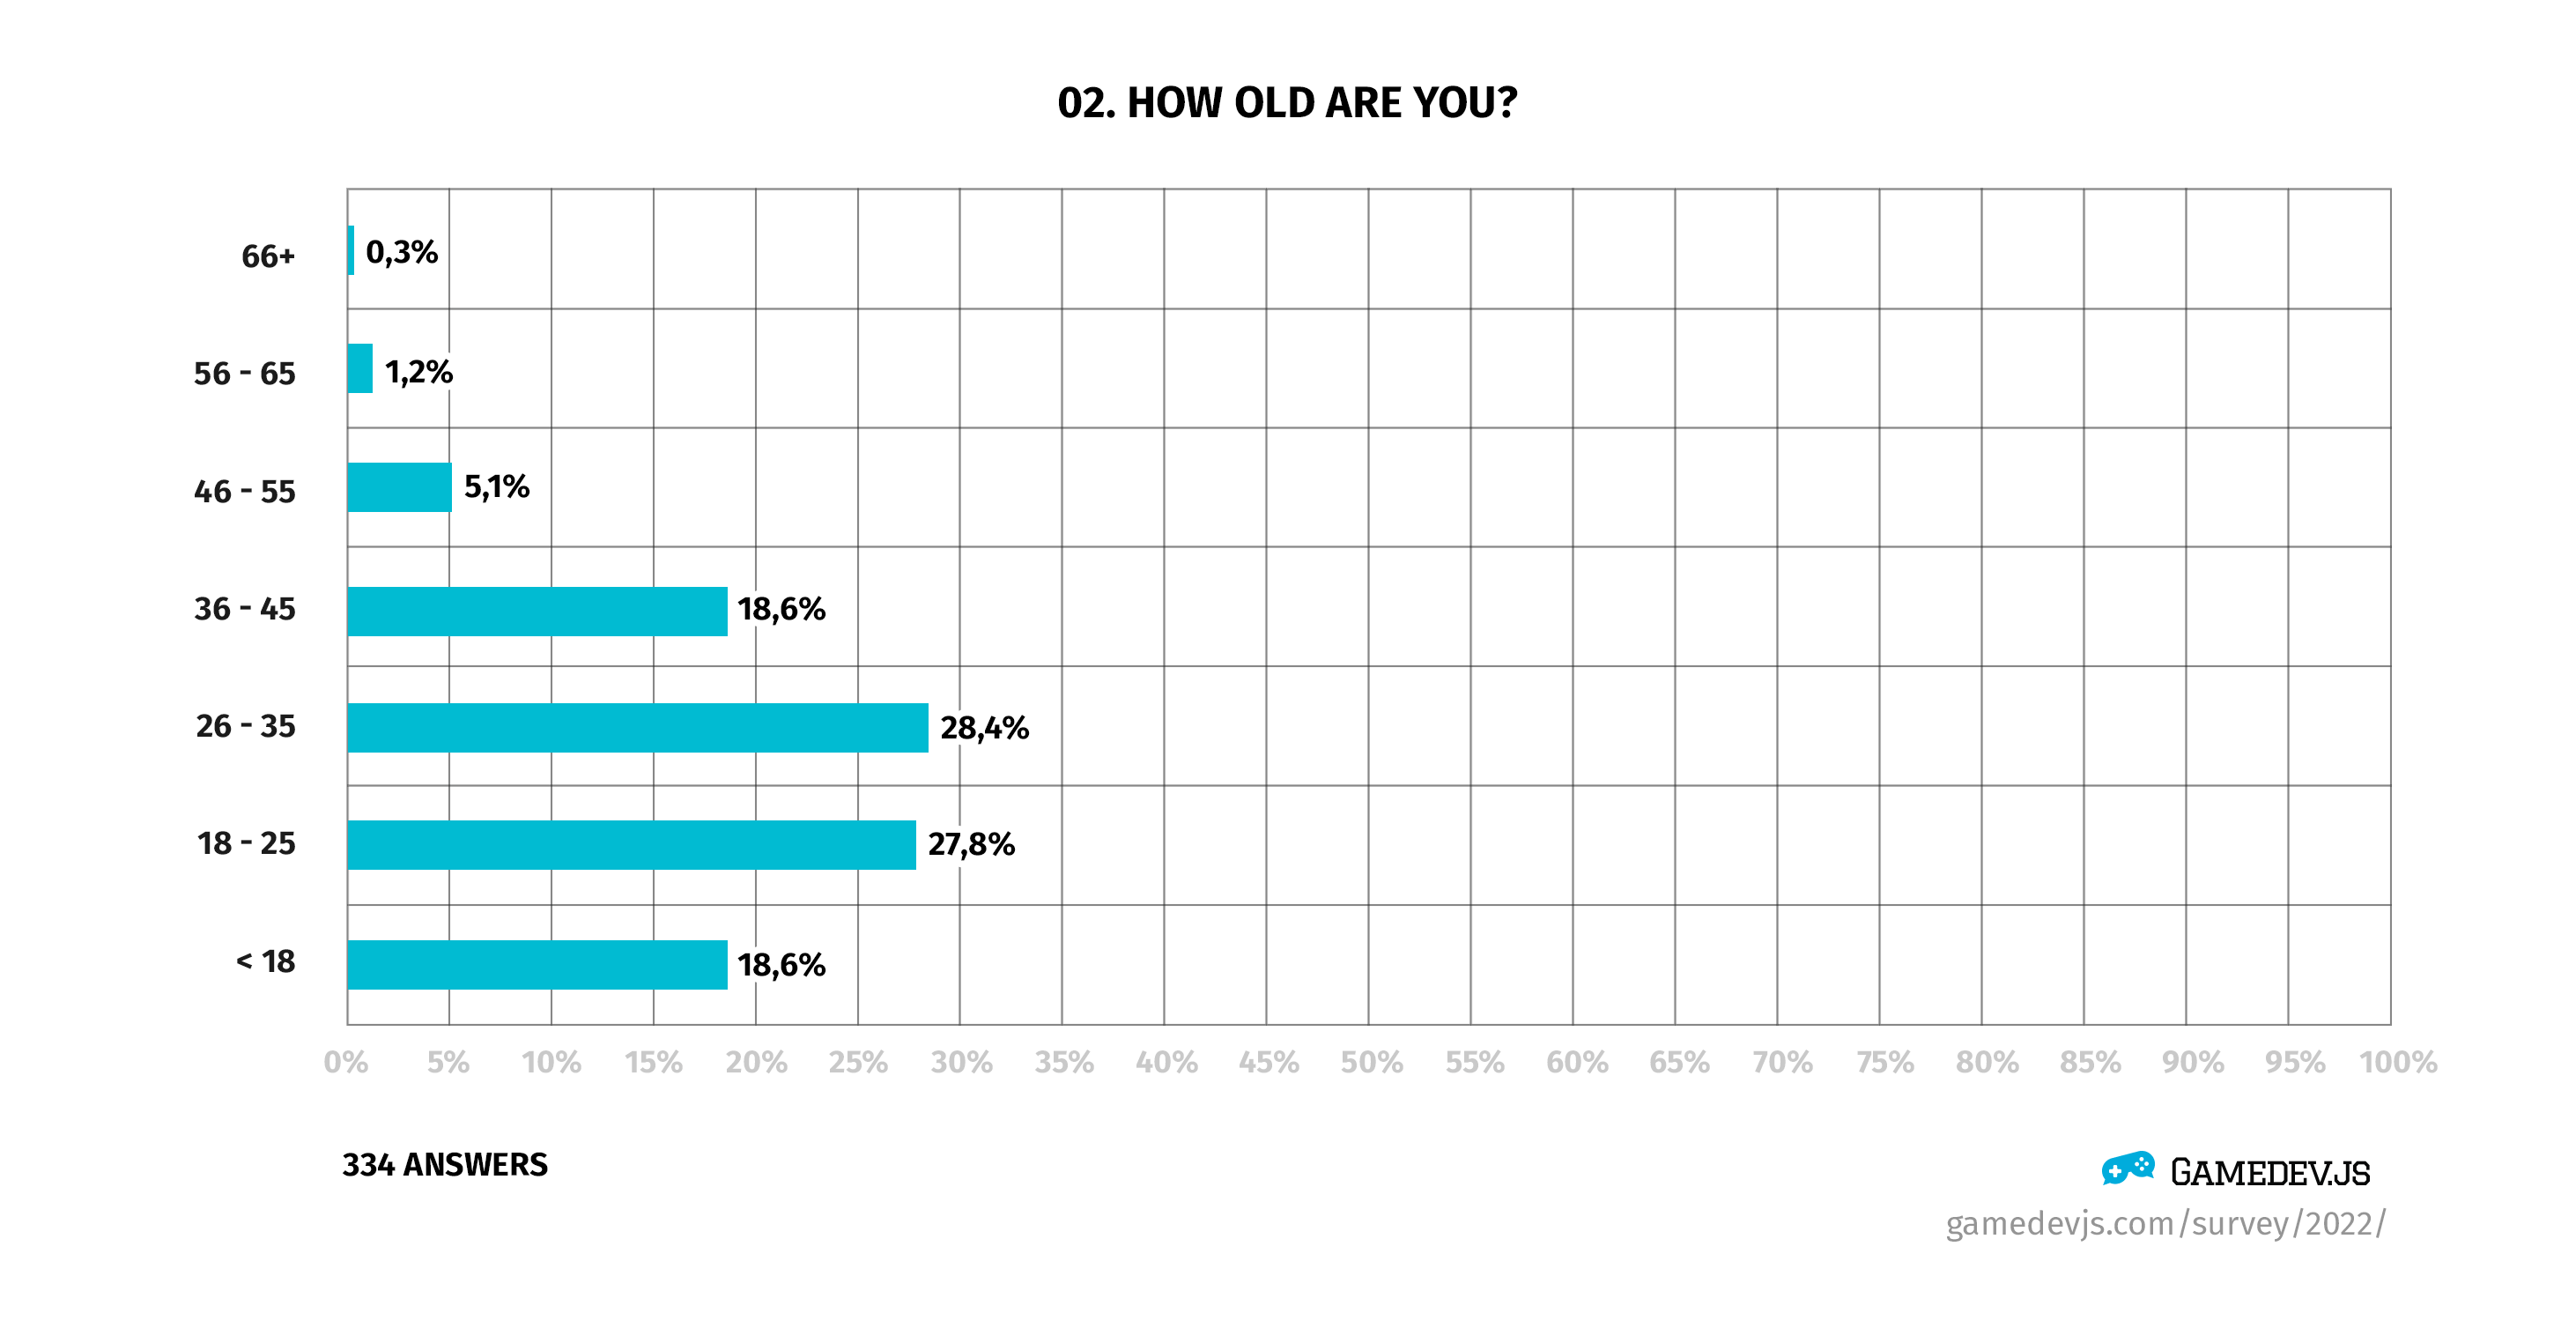 Gamedev.js Survey 2022 - Question #2: How old are you?